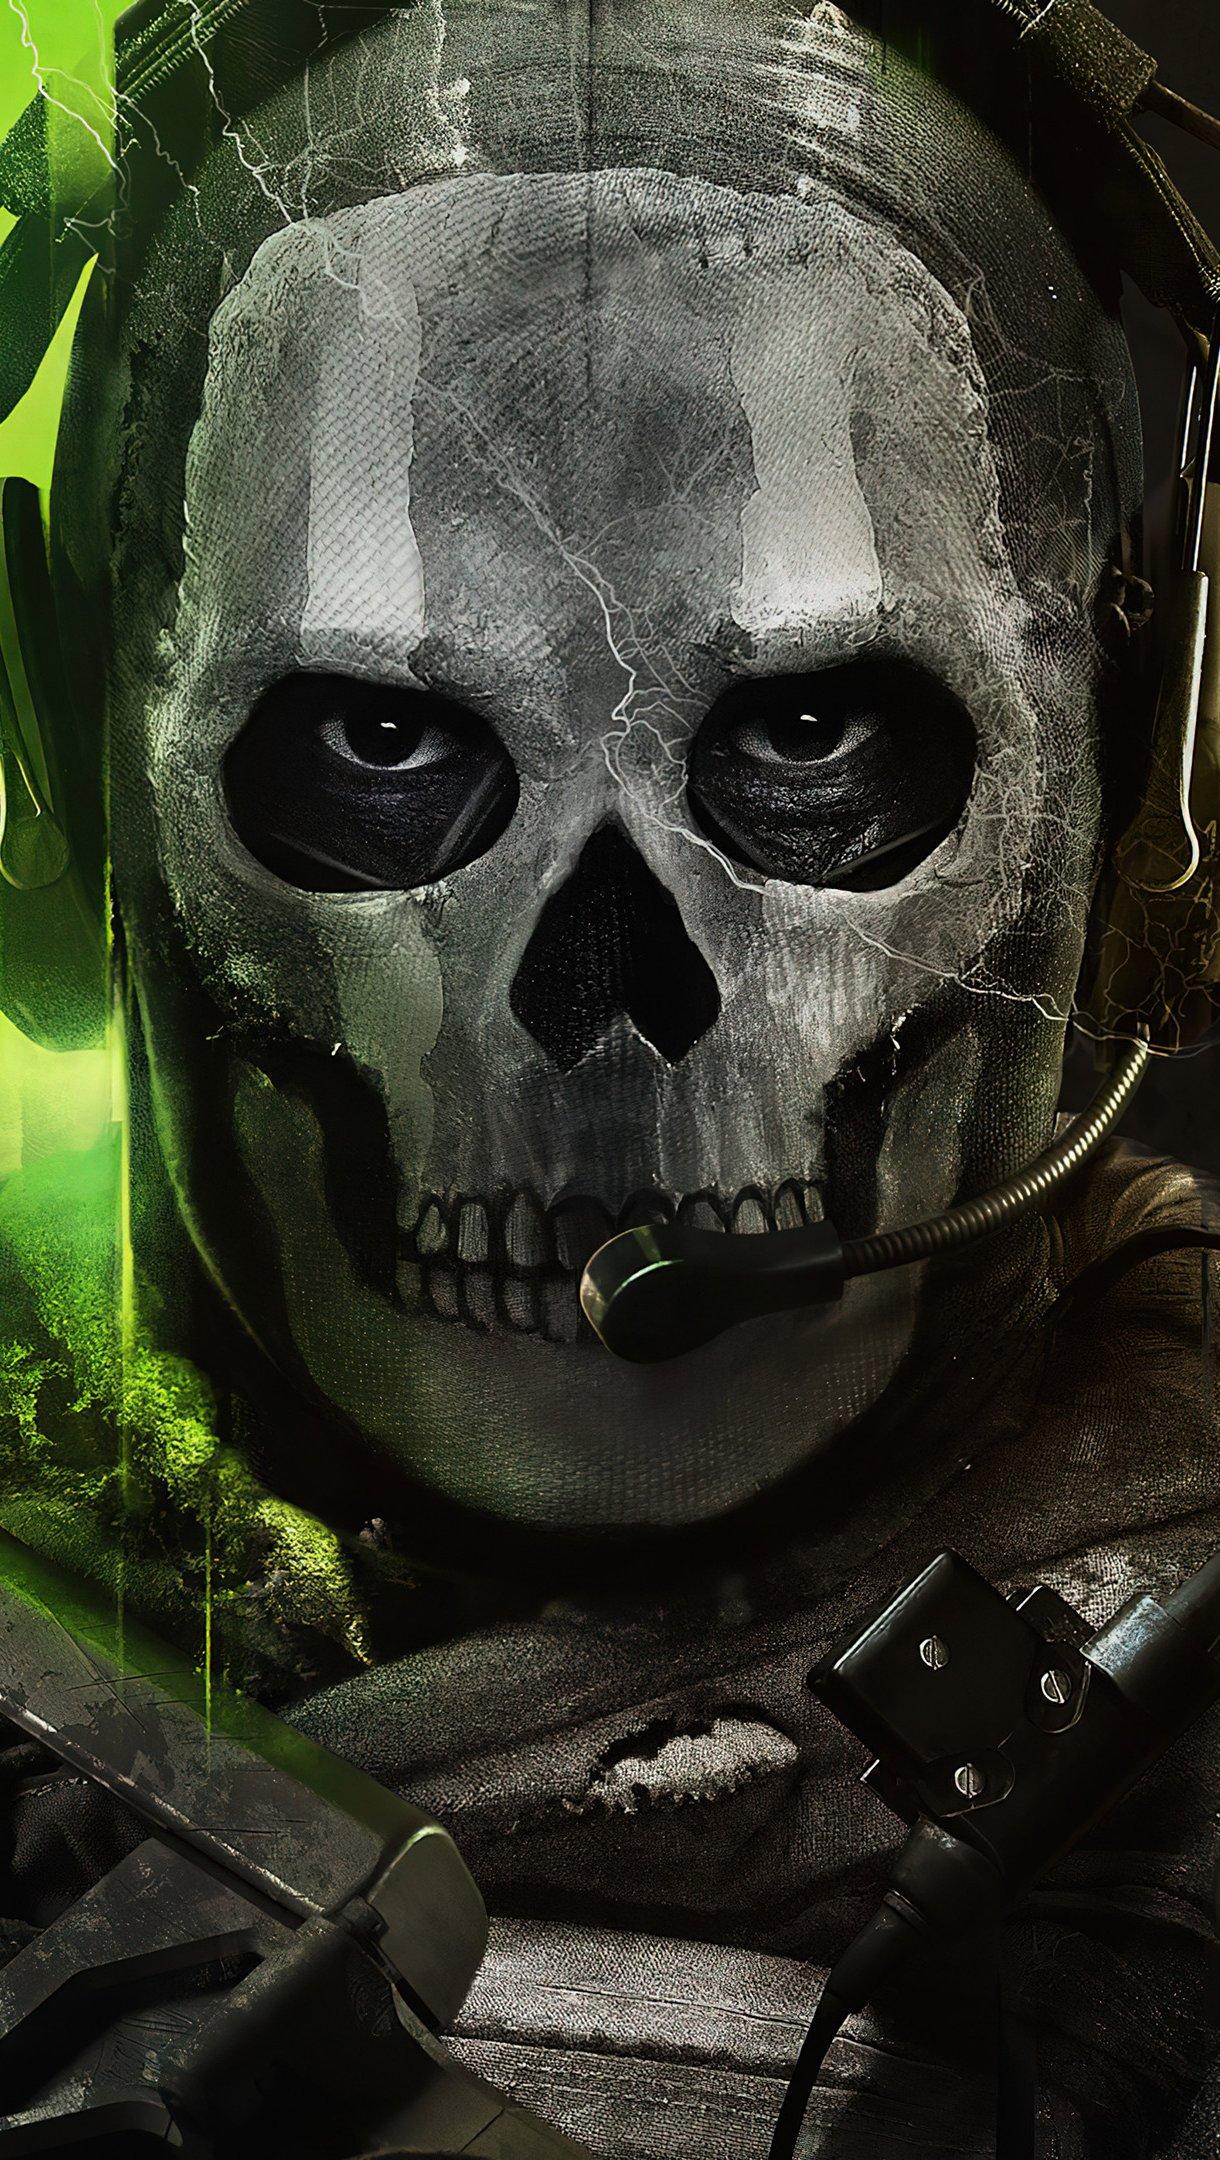 463954 video game art Call of Duty skull Call of Duty Ghosts PC  gaming video games  Rare Gallery HD Wallpapers